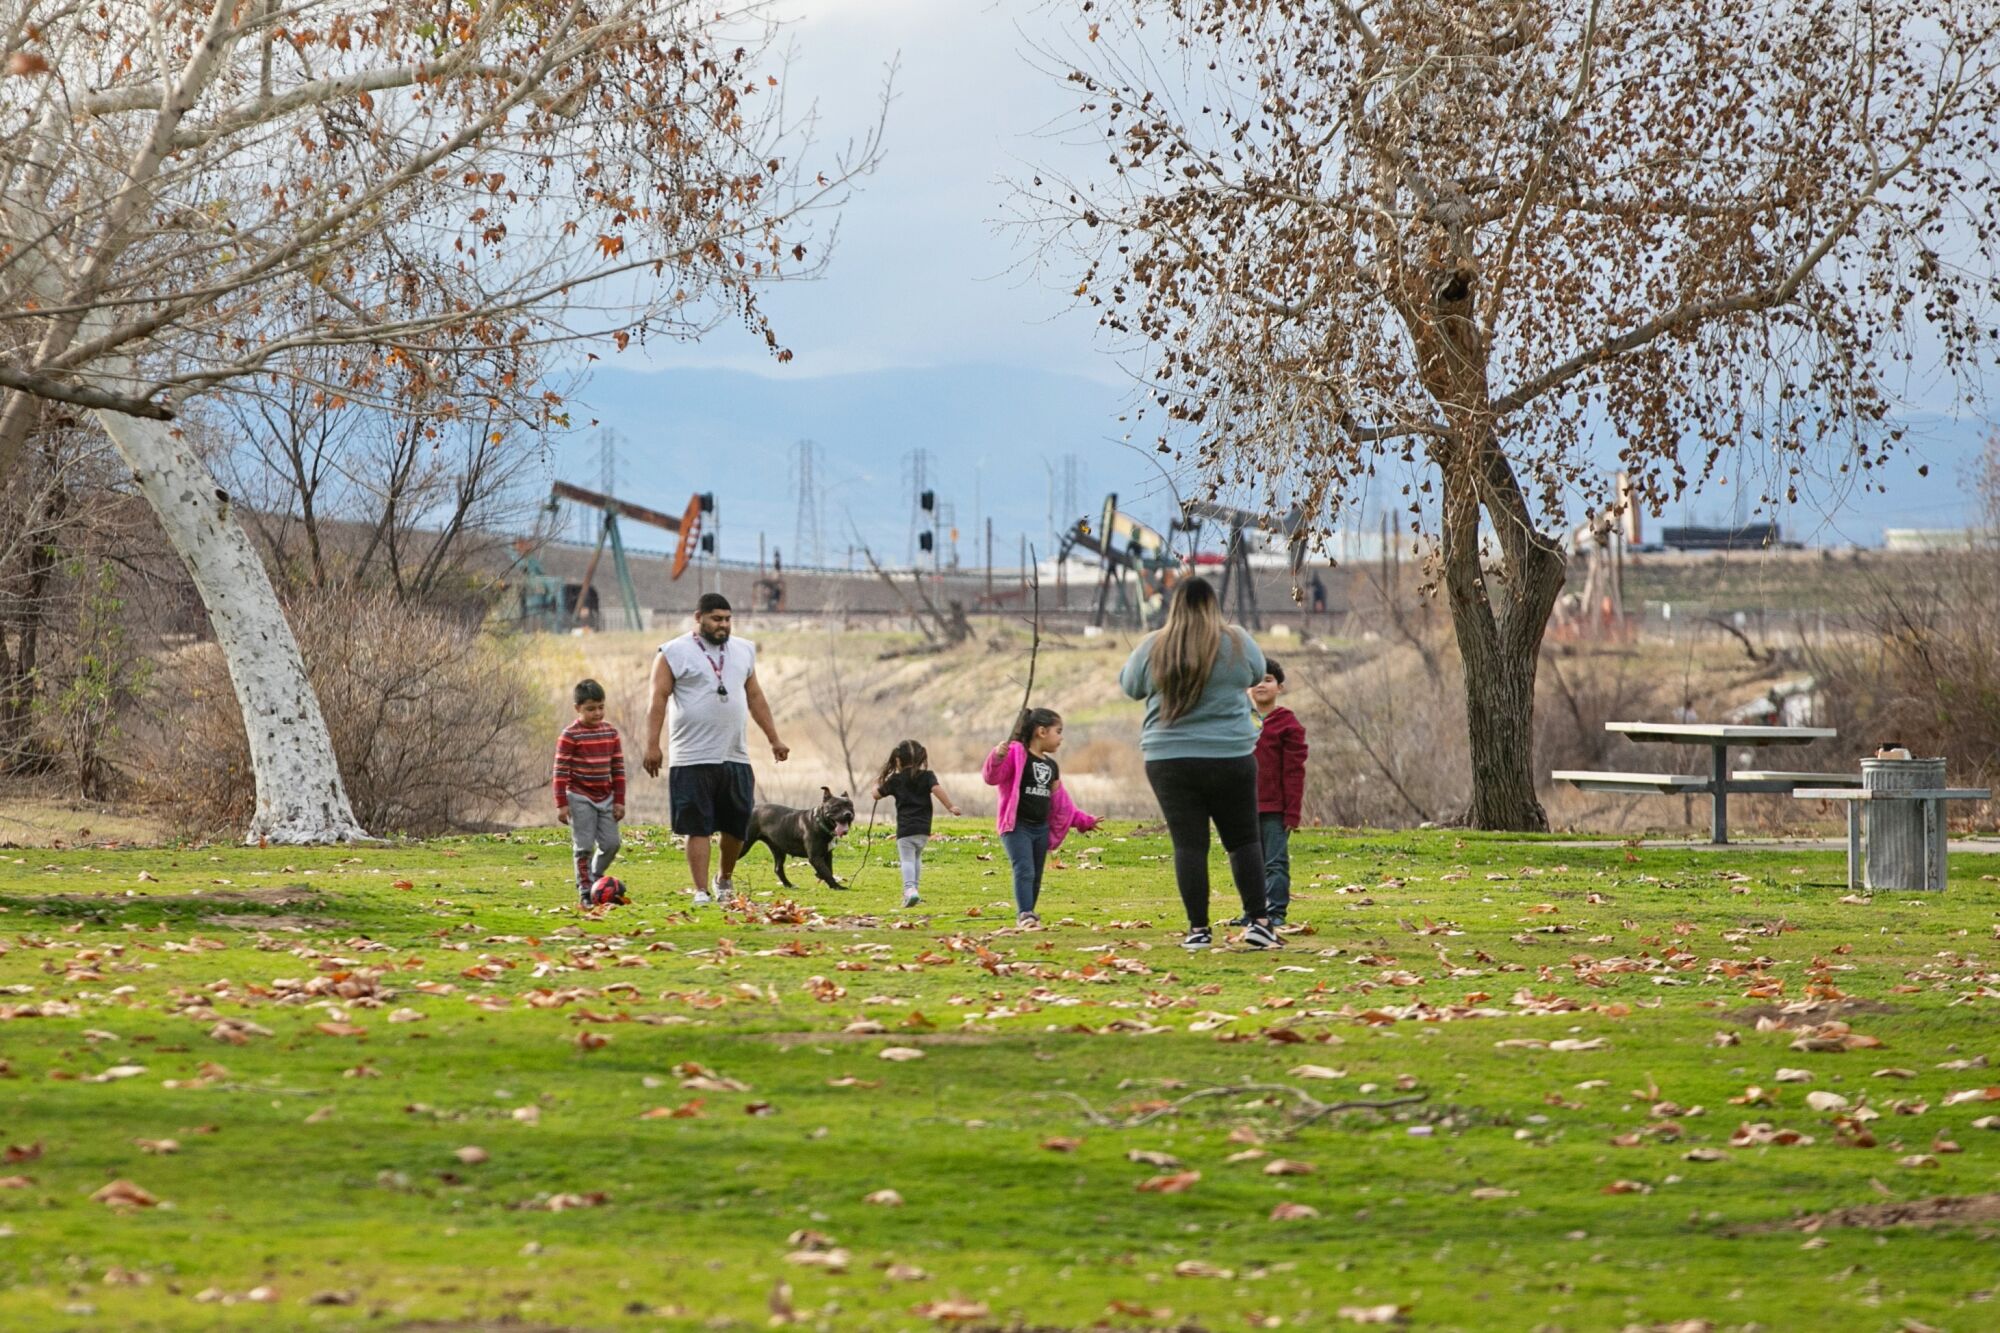 Two adults, four children and a dog at a park.